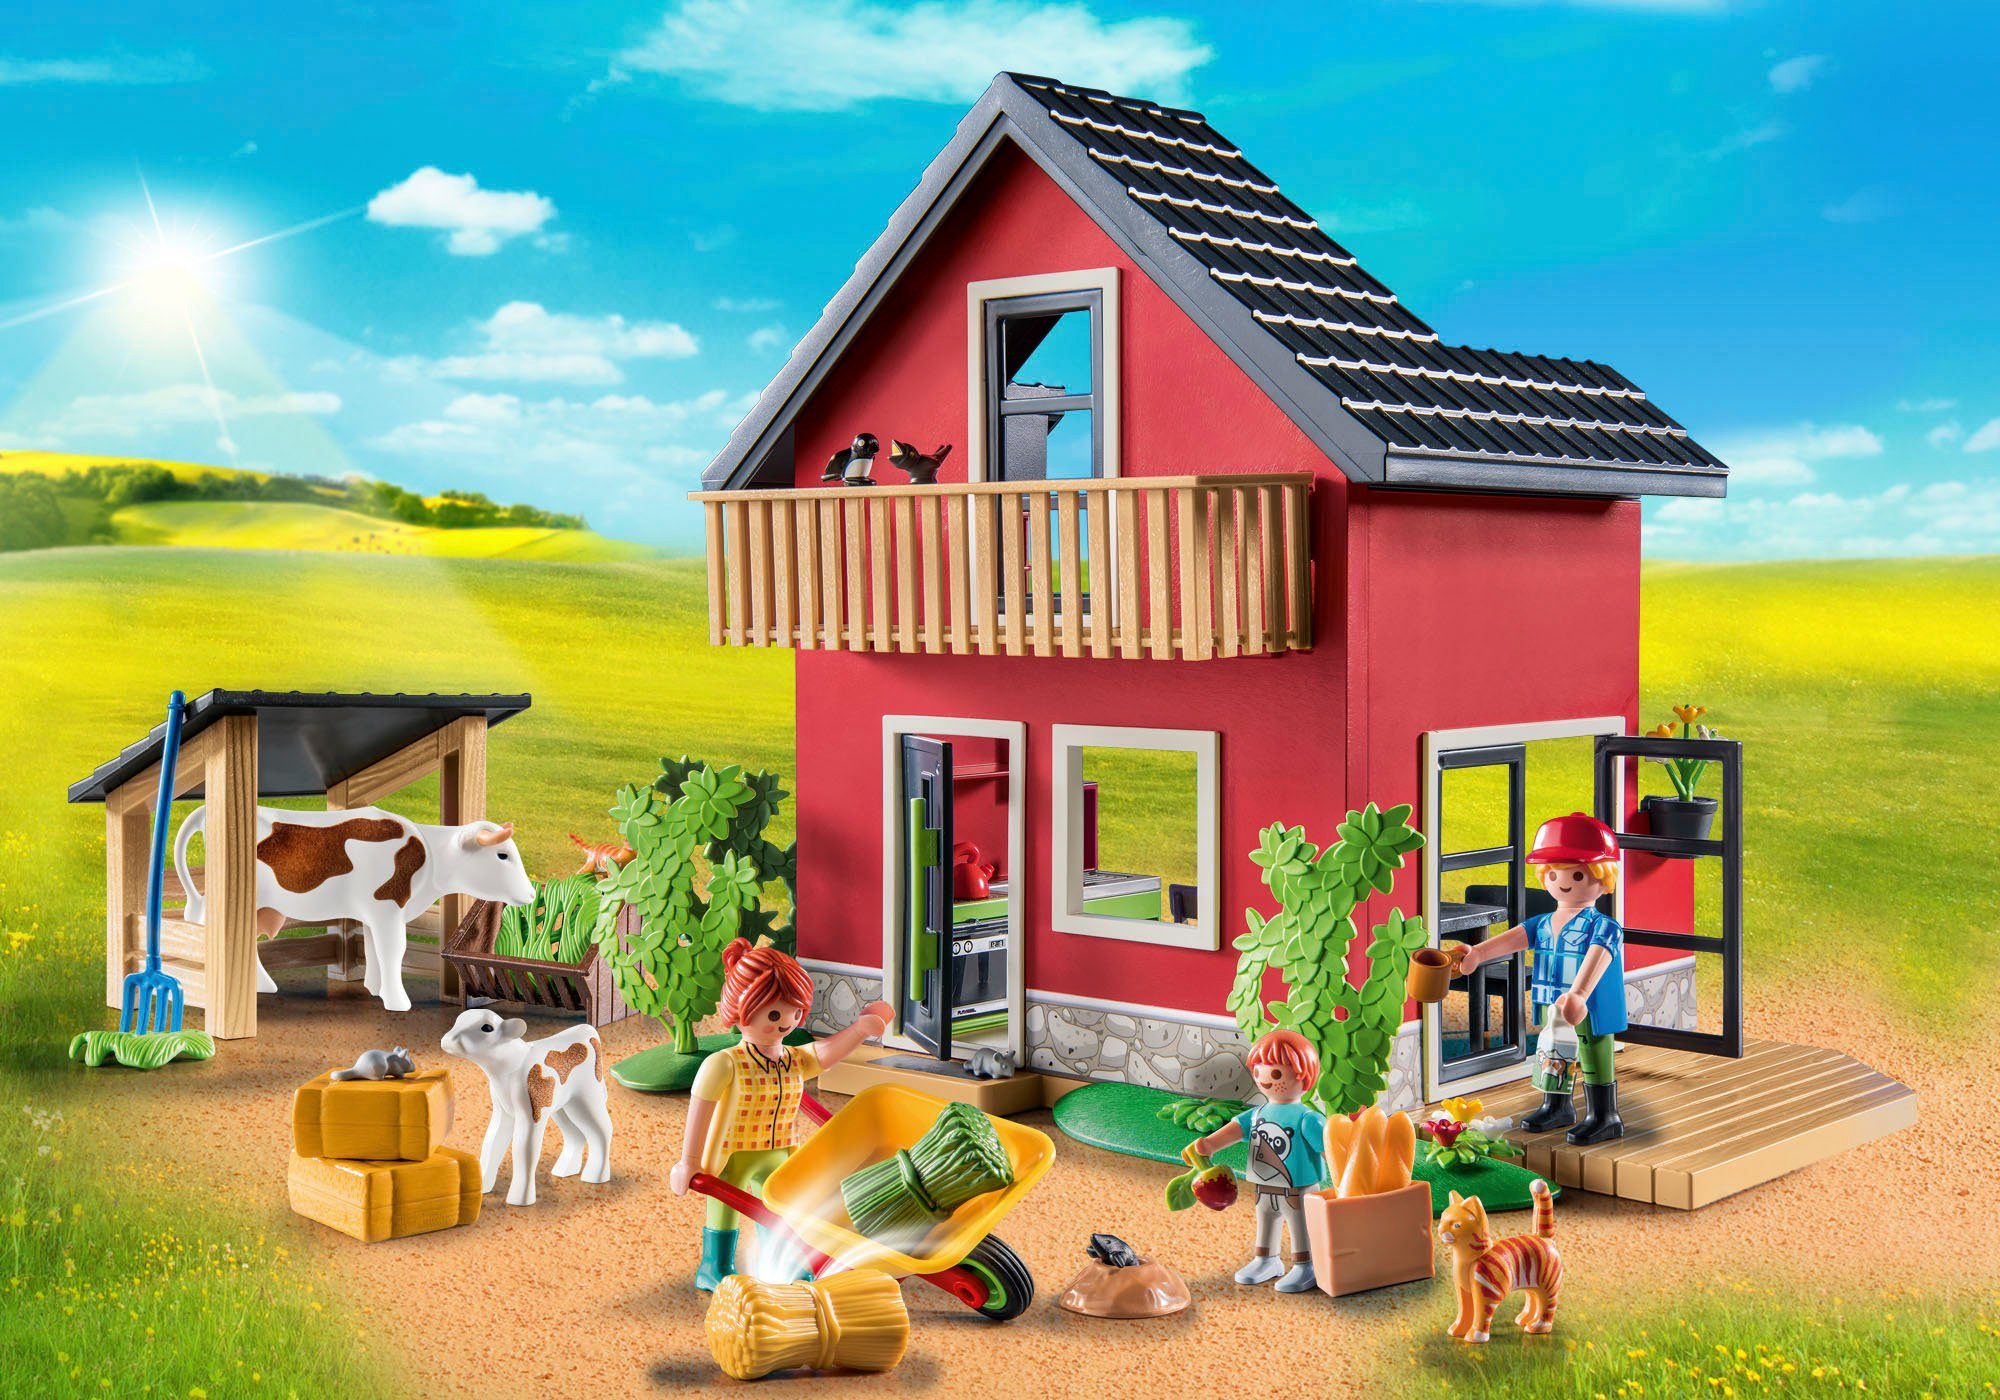 Playmobil® Konstruktions-Spielset Bauernhaus in Made Germany (71248), Country, teilweise aus Material; recyceltem